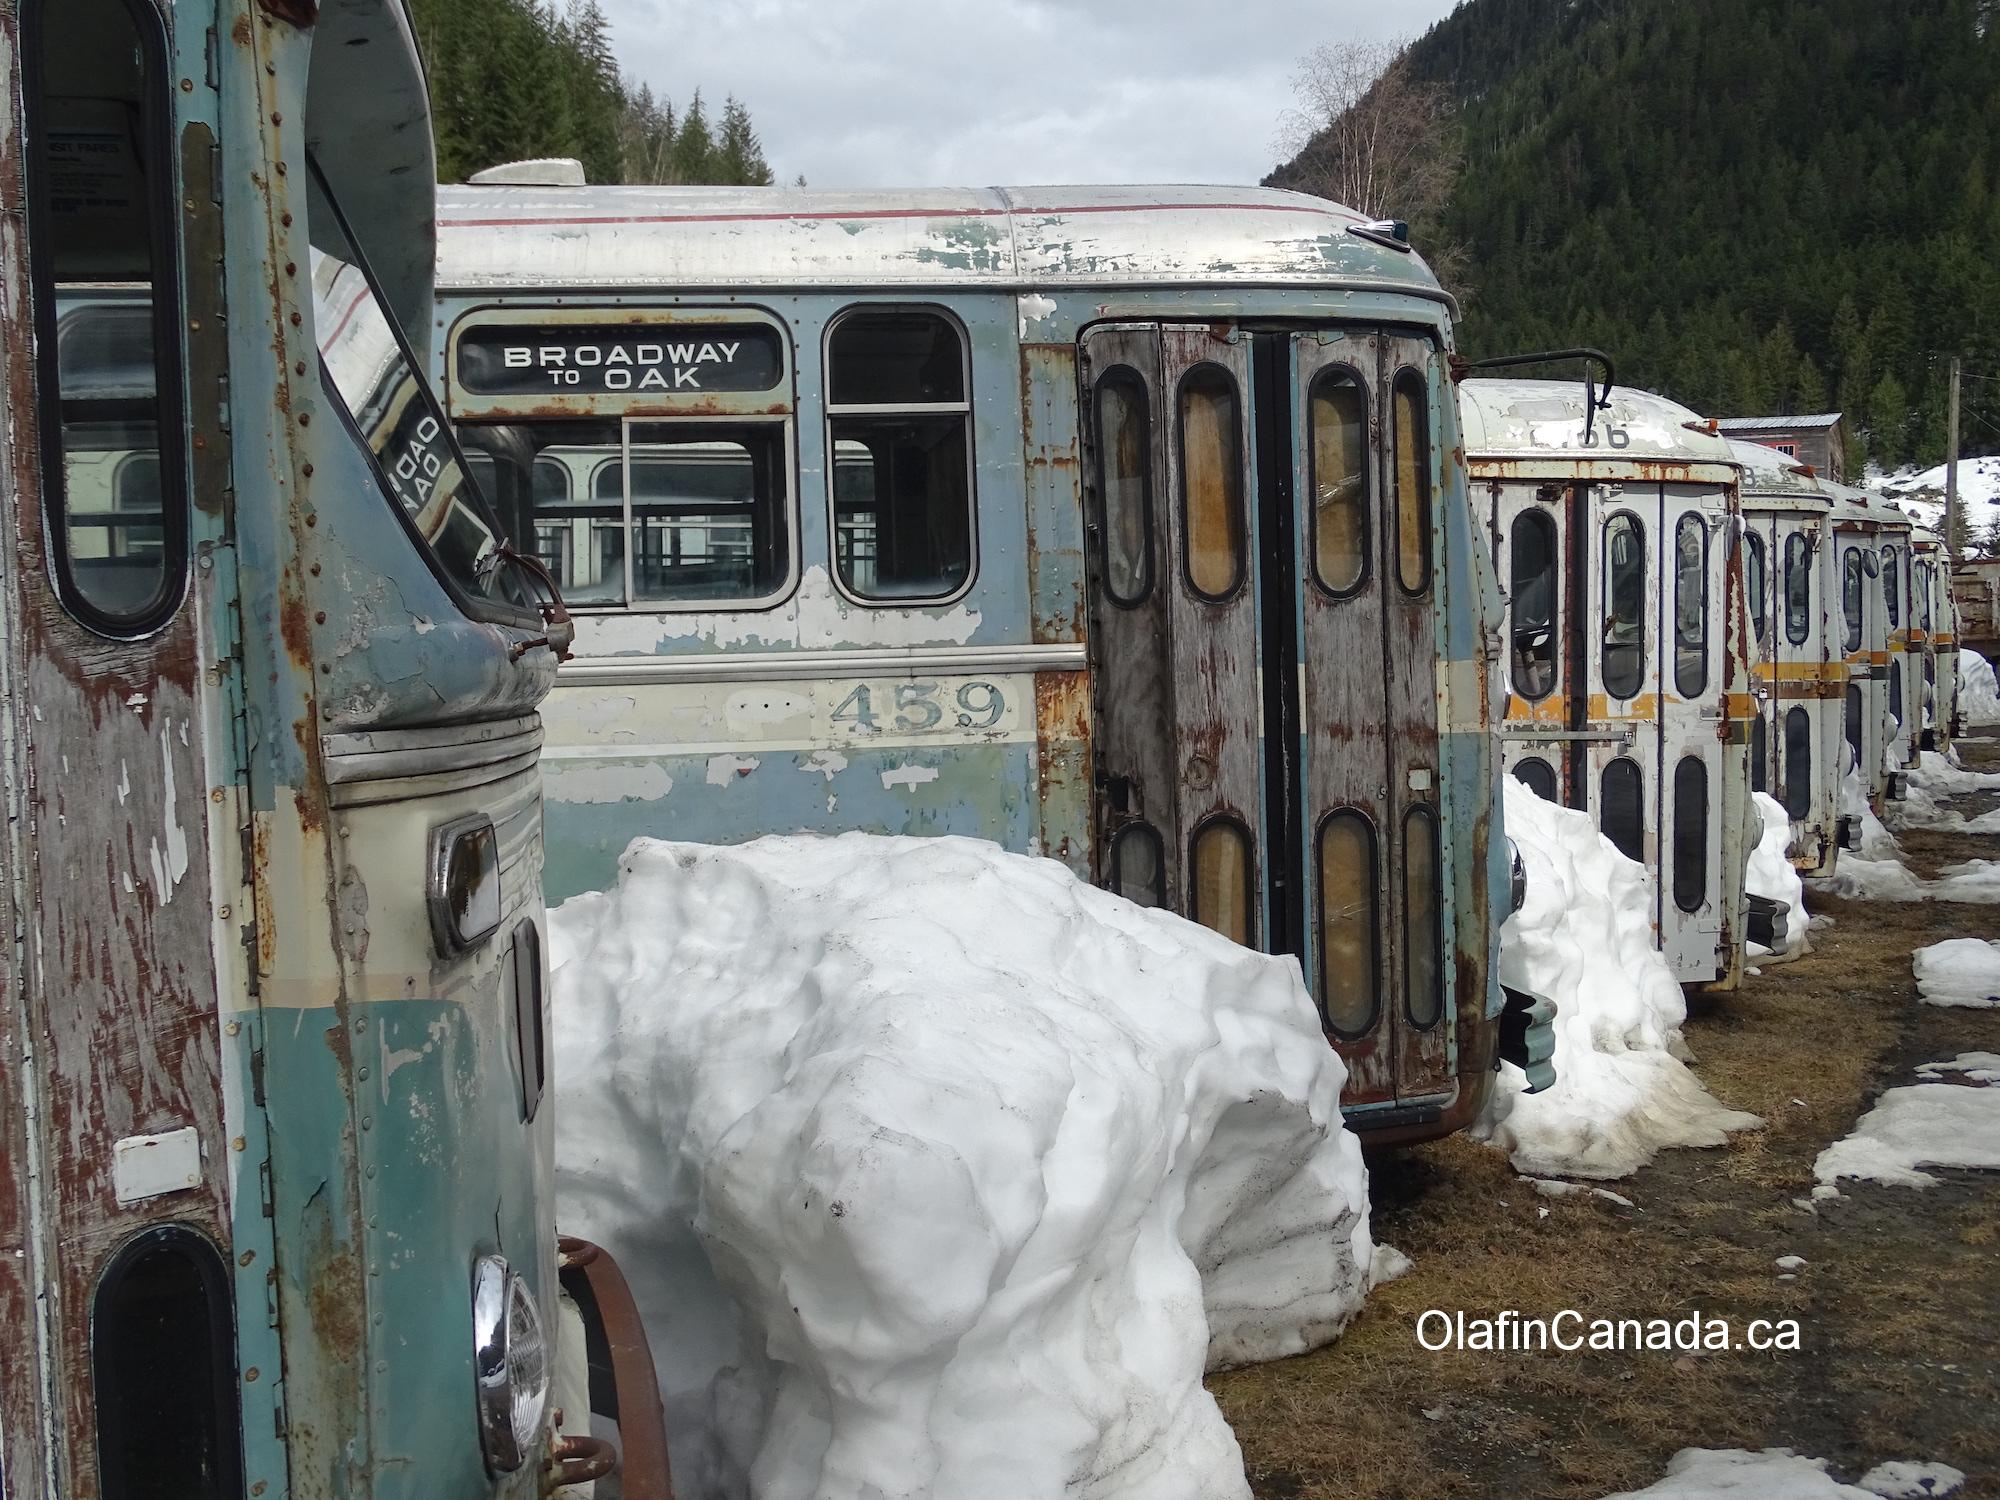 Vancouver busses from the fifties #olafincanada #britishcolumbia #discoverbc #abandonedbc #sandon #busses